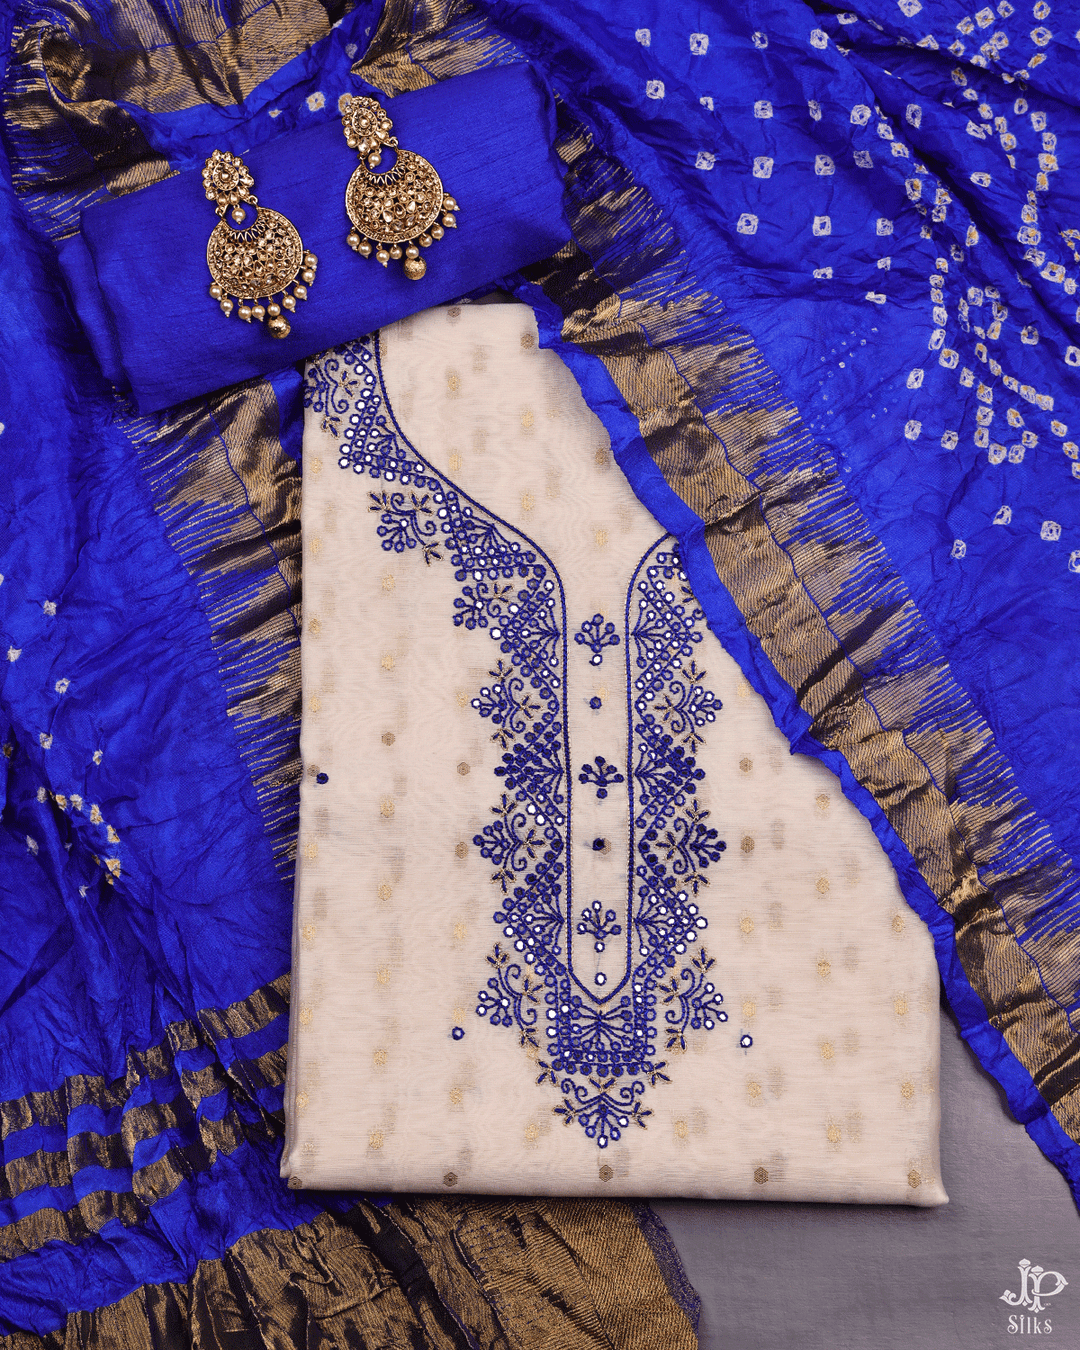 Off - White and Navy Blue Unstitched Chudidhar Material - D7104 - View 1